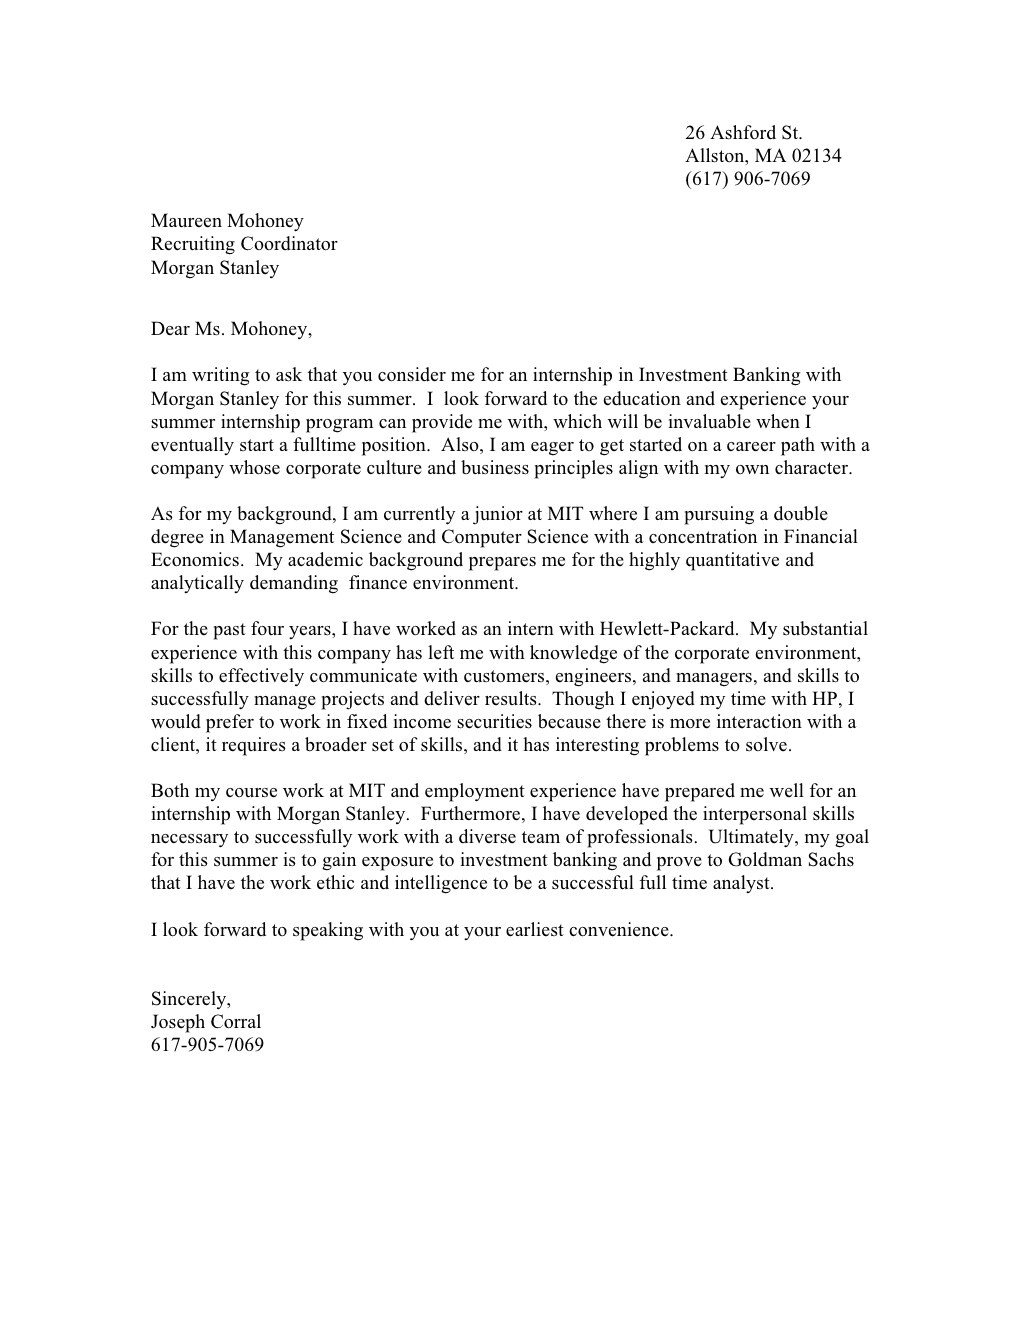 internship cover letter computer science